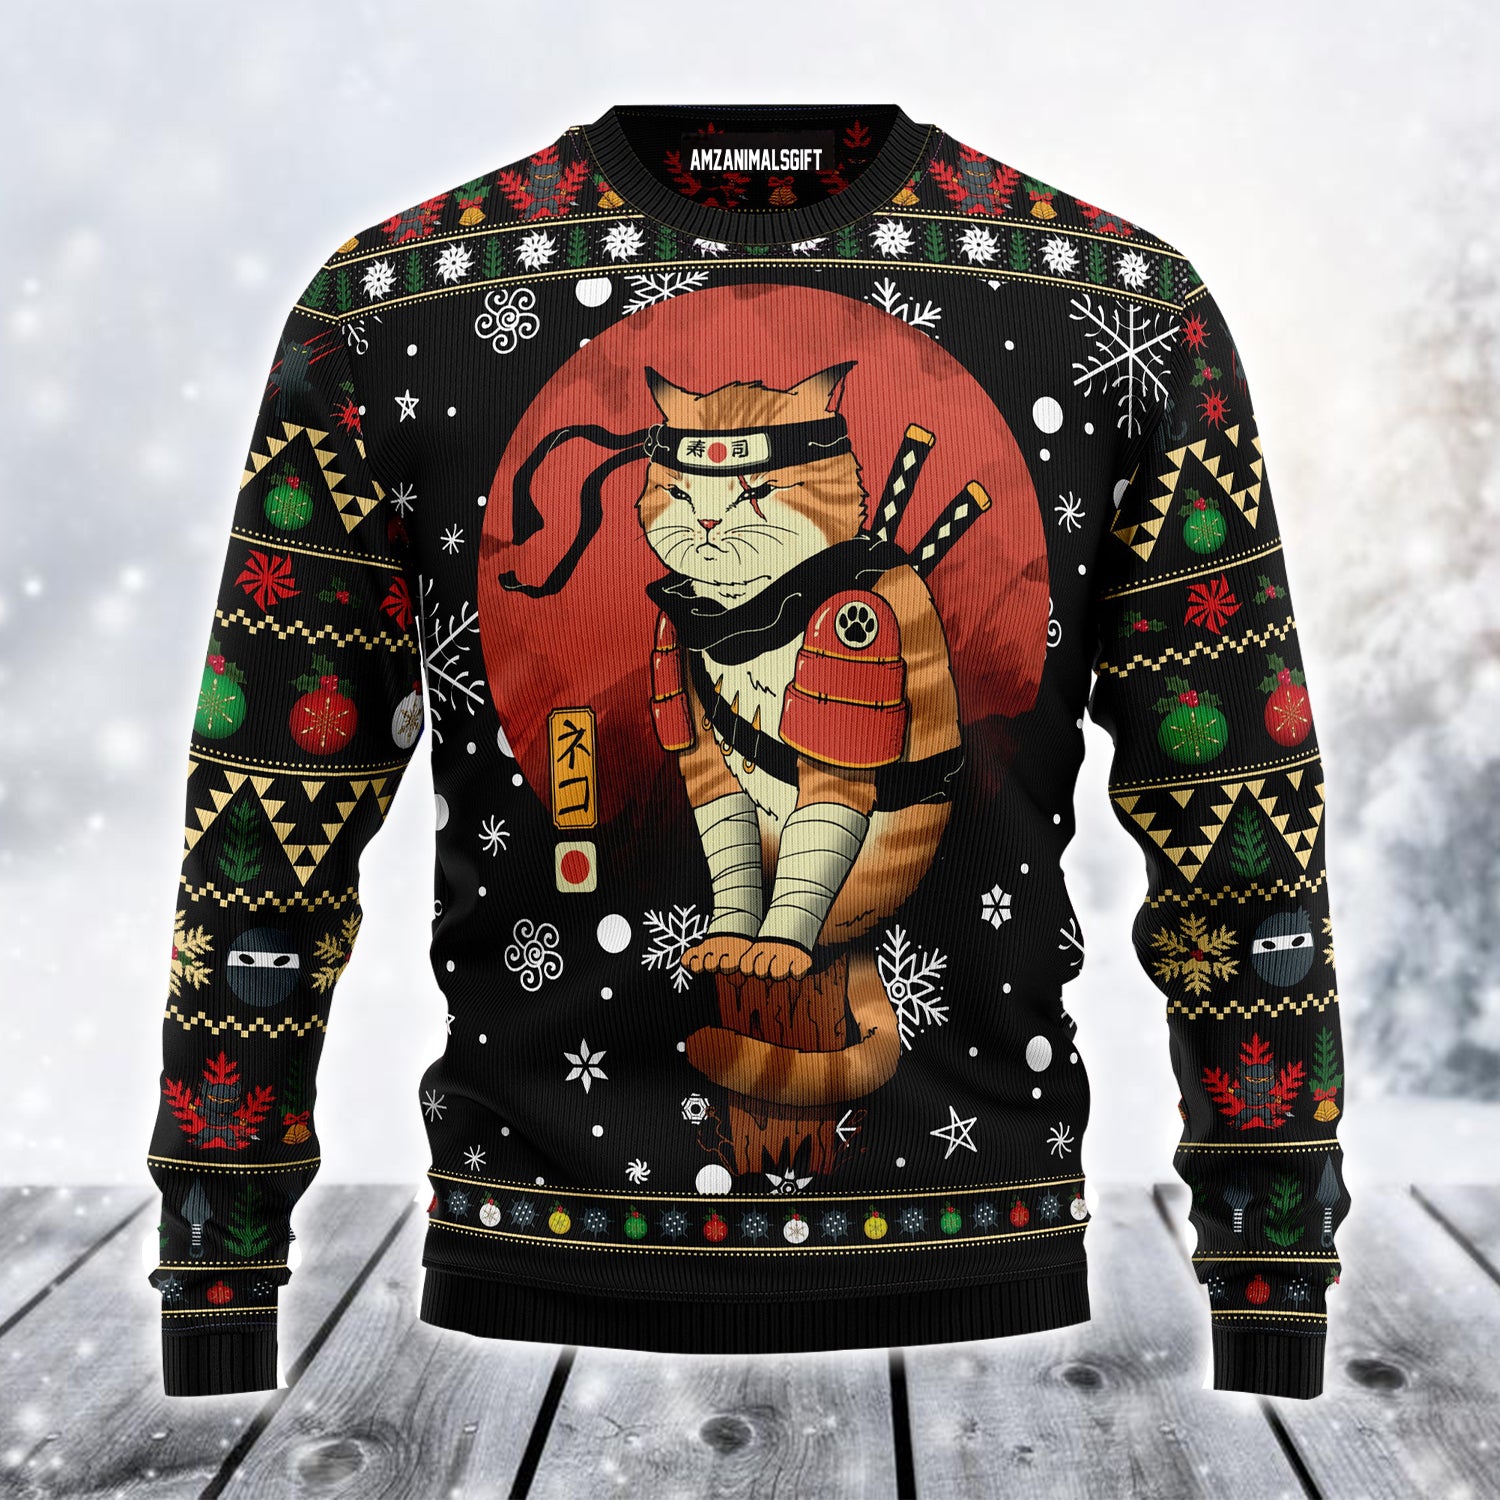 Ninja Cat Ugly Christmas Sweater, Funny Christmas Pattern Ugly Sweater For Men & Women - Best Gift For Christmas, Friends, Cat Lovers